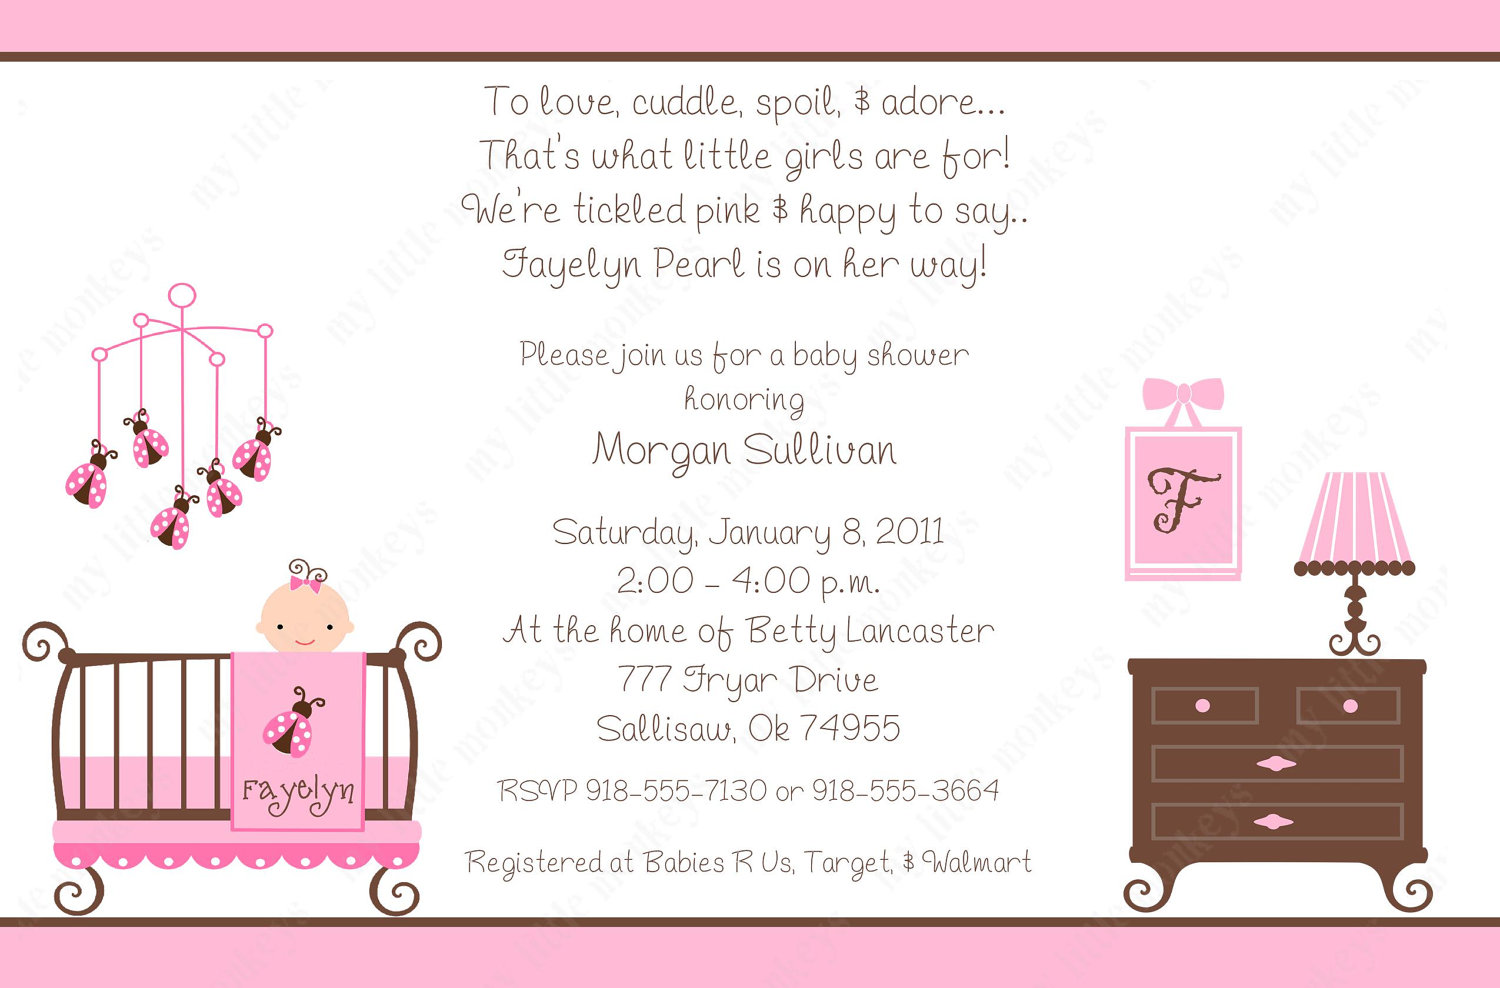 Full Size of Baby Shower:unique Baby Shower Ideas Pinterest Baby Shower Ideas For Girls Baby Girl Themes For Bedroom Unique Baby Shower Decorations Baby Girl Themes For Baby Shower Baby Shower Themes Baby Shower Ideas Baby Shower Decorations Printable Baby Shower Invitations For Girl